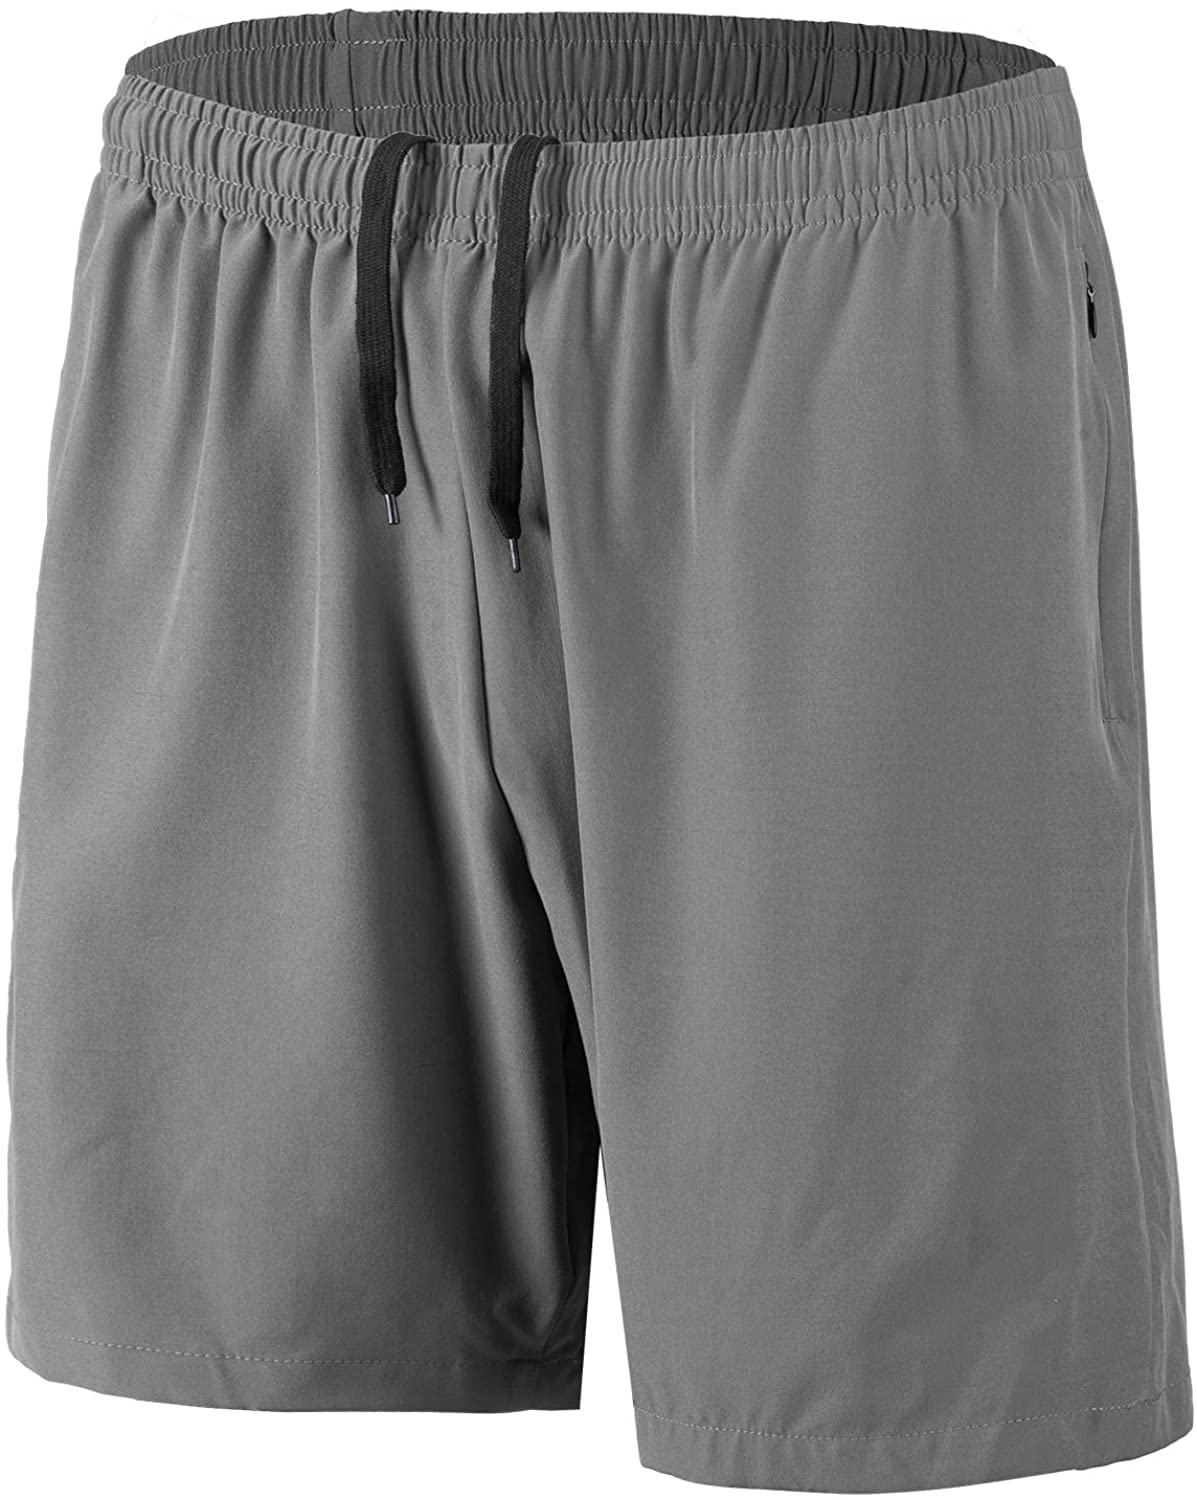 HMIYA Men's Sports Shorts Quick Dry with Zip Pockets for Workout Running  Trainin